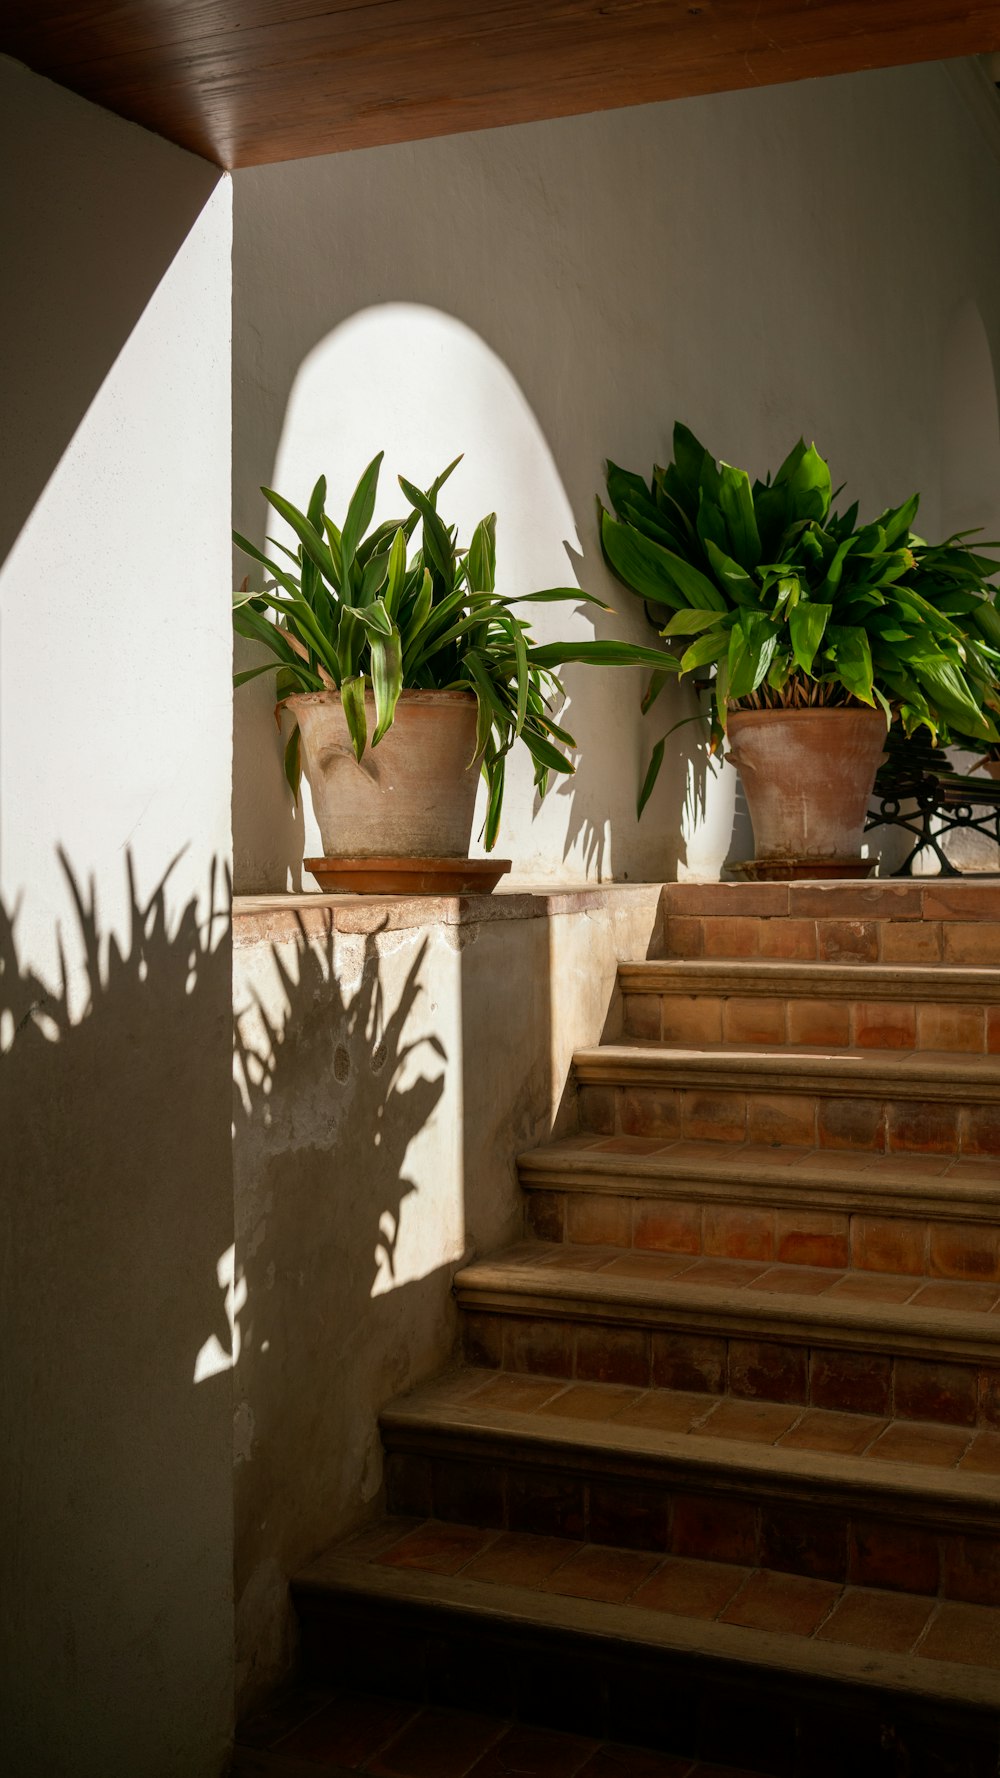 two green-leafed potted plants in the staircase